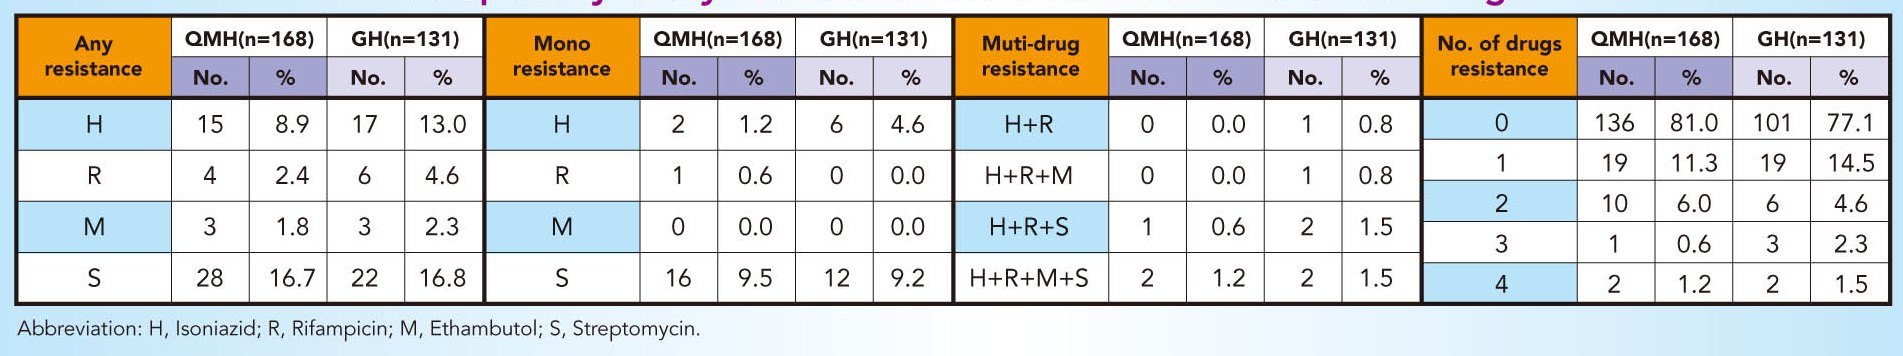 Table HKW-4. Susceptibility of MTB isolates to four 1st line drugs, HKW, 2013 